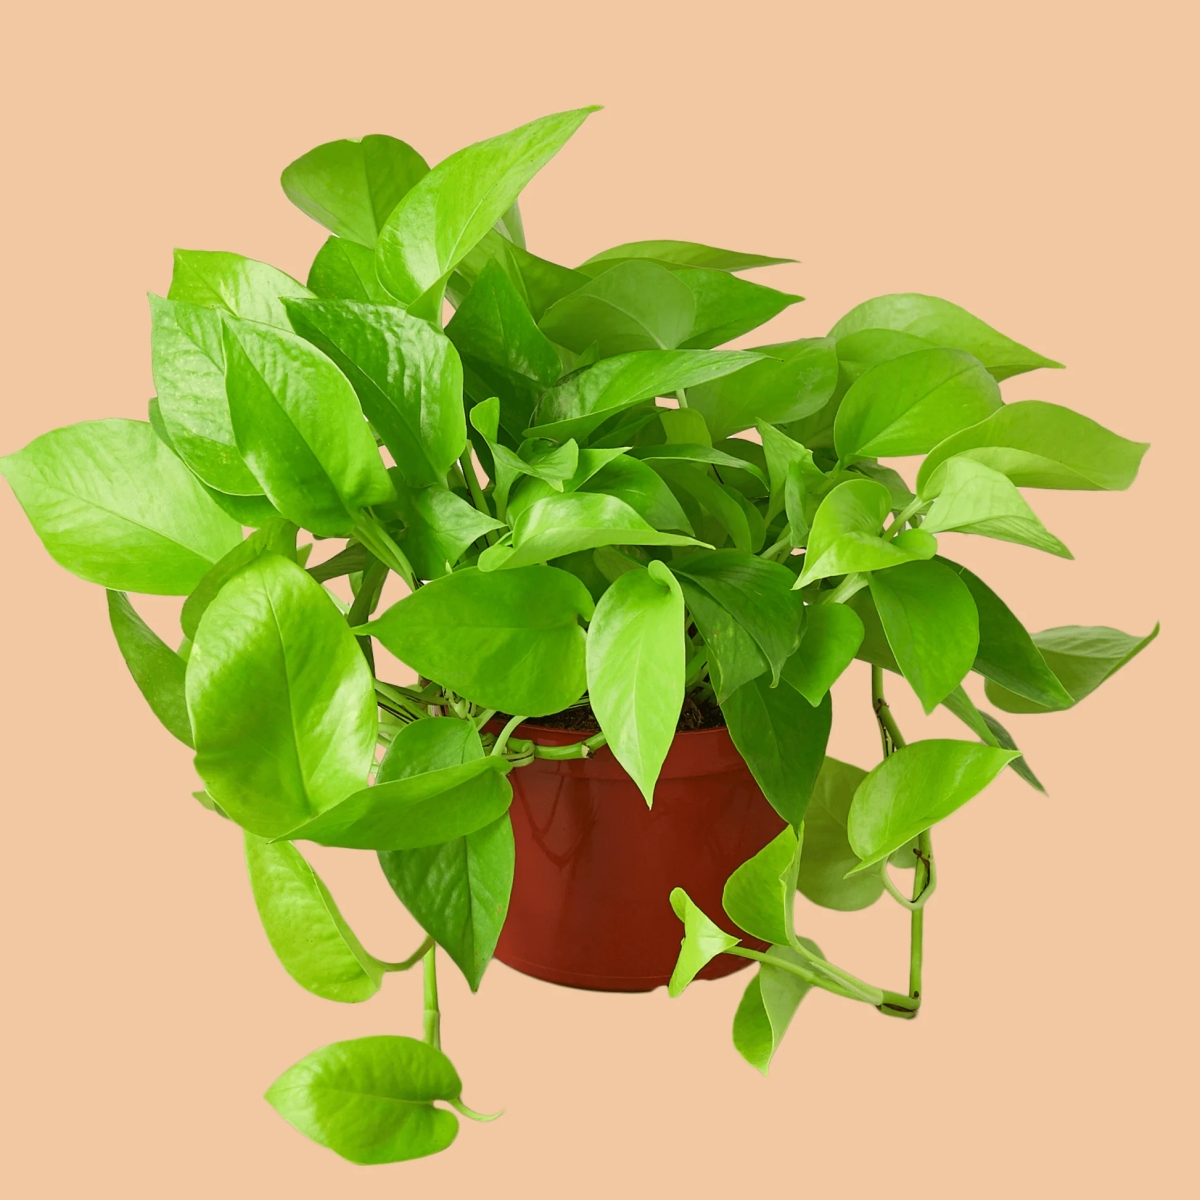 Nurturing Nature’s Neon: How to Take Care of a Neon Pothos Plant